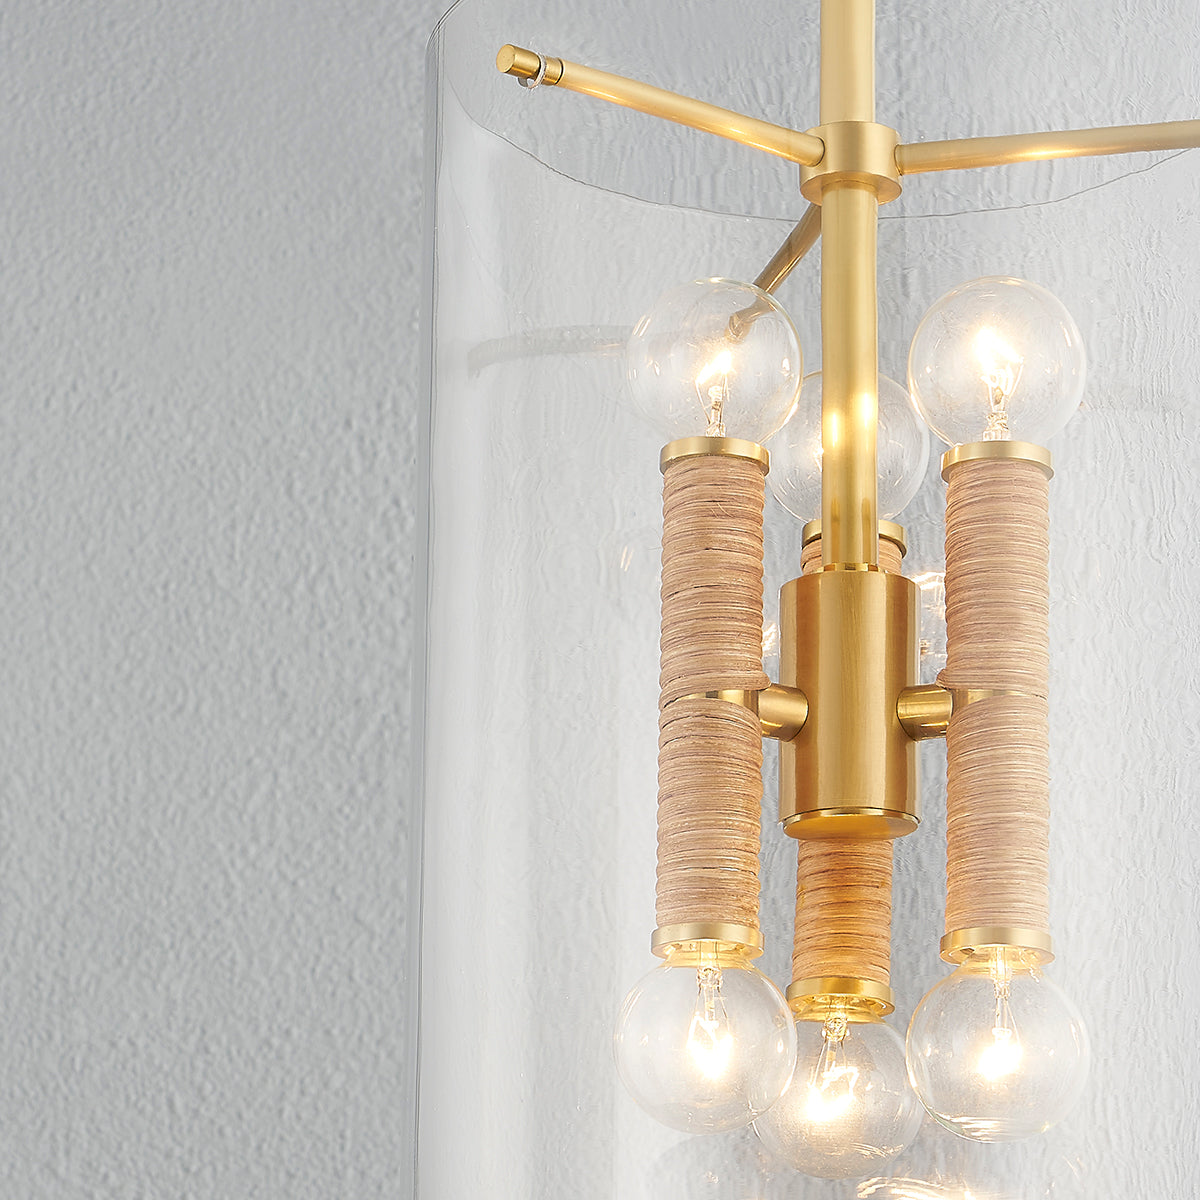 Aged Brass Frame Rattan Wrapped with Clear Cylindrical Glass Shade Pendant